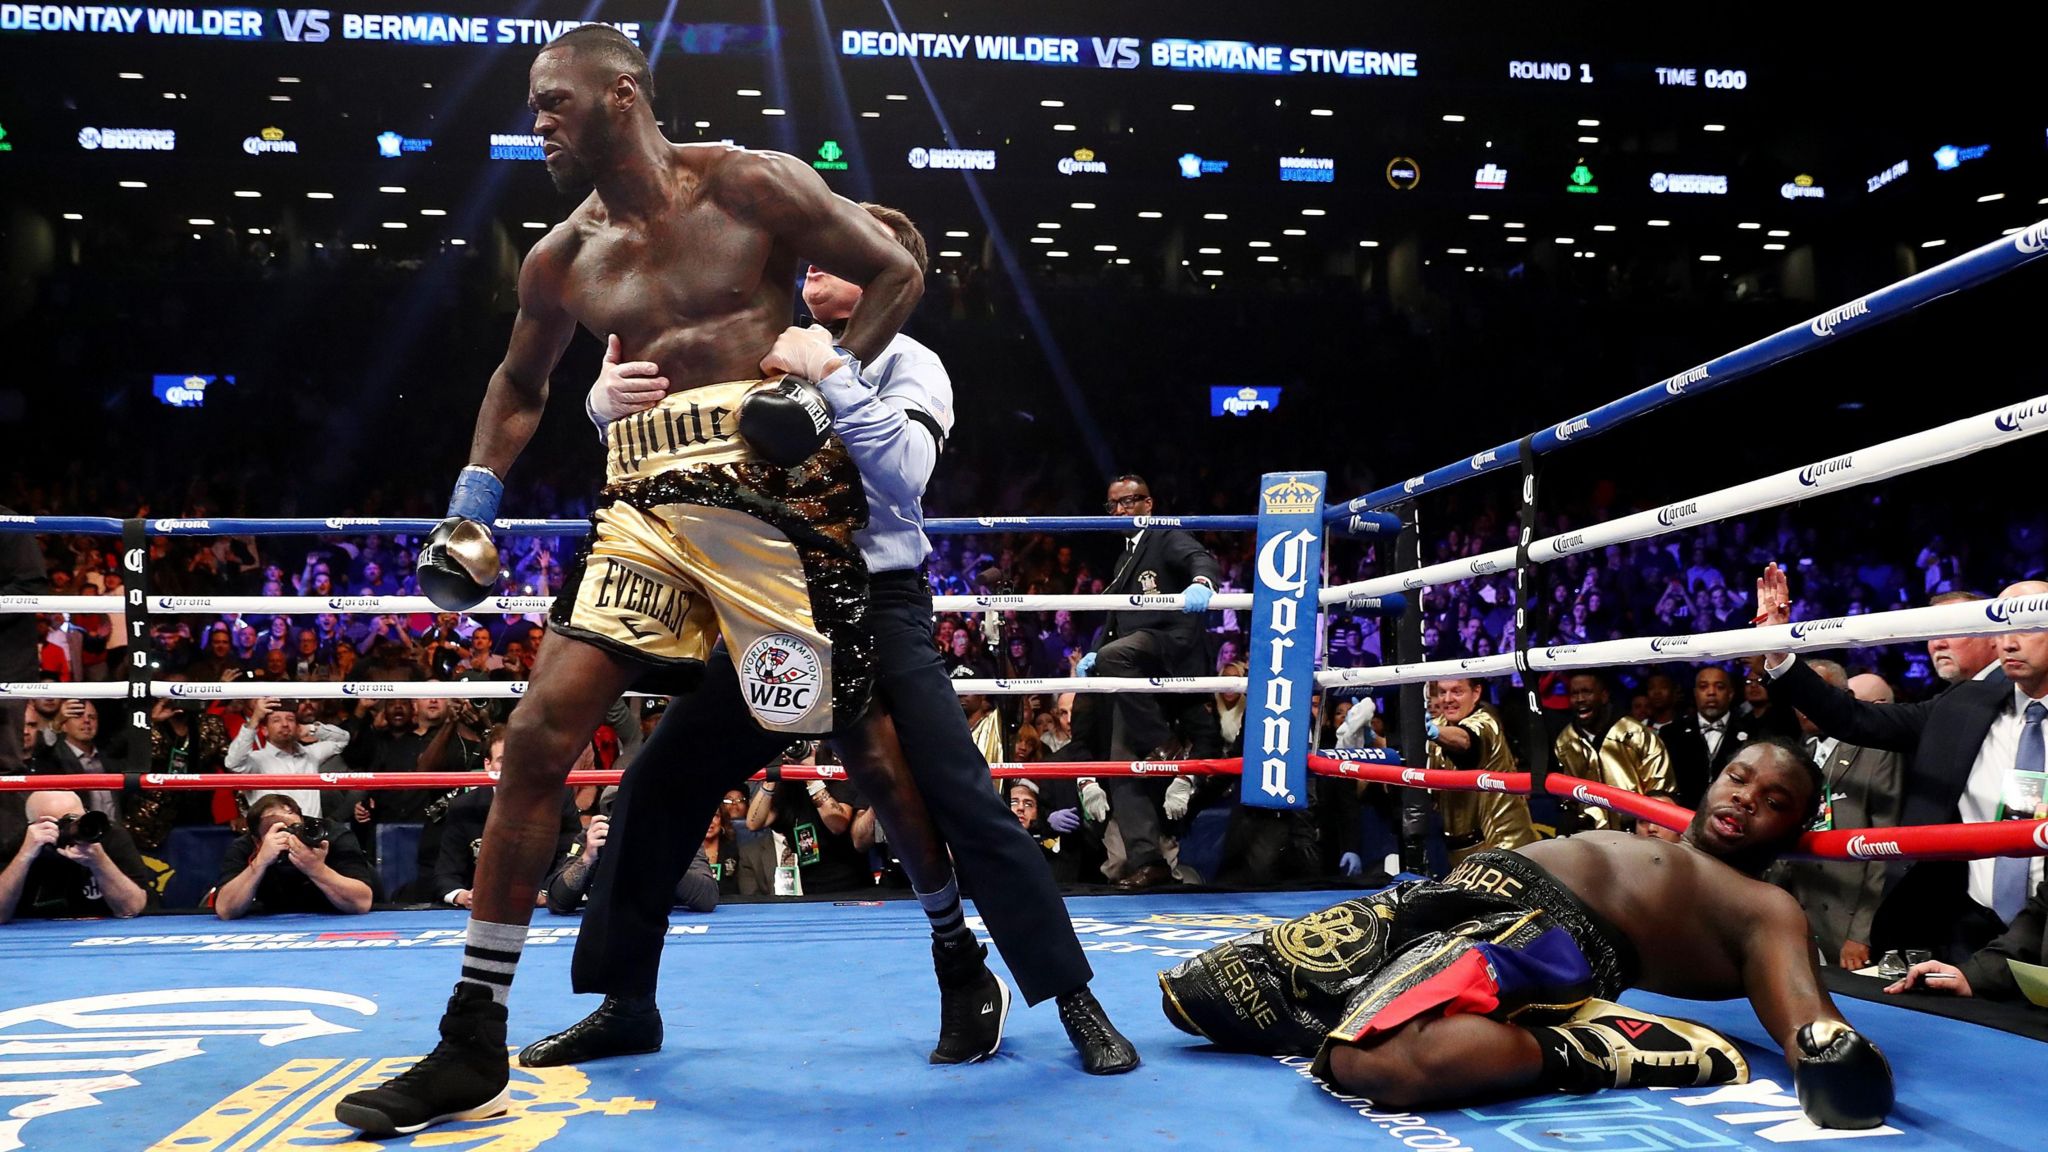 Deontay Wilder is led away from a stricken Bermane Stiverne 